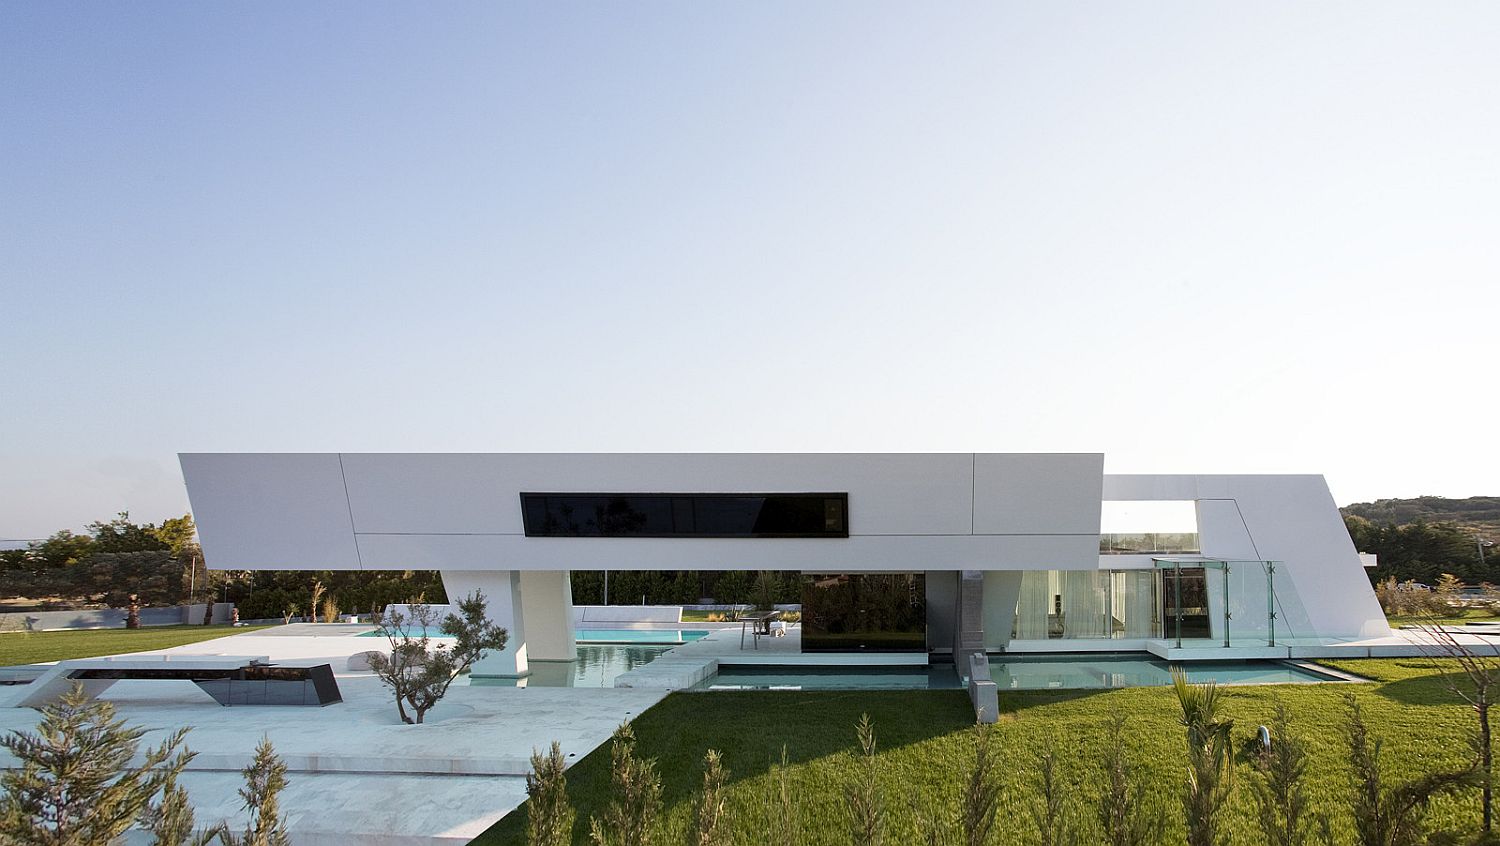 Polished white exterior of the home gives it a contemporary minimal appeal